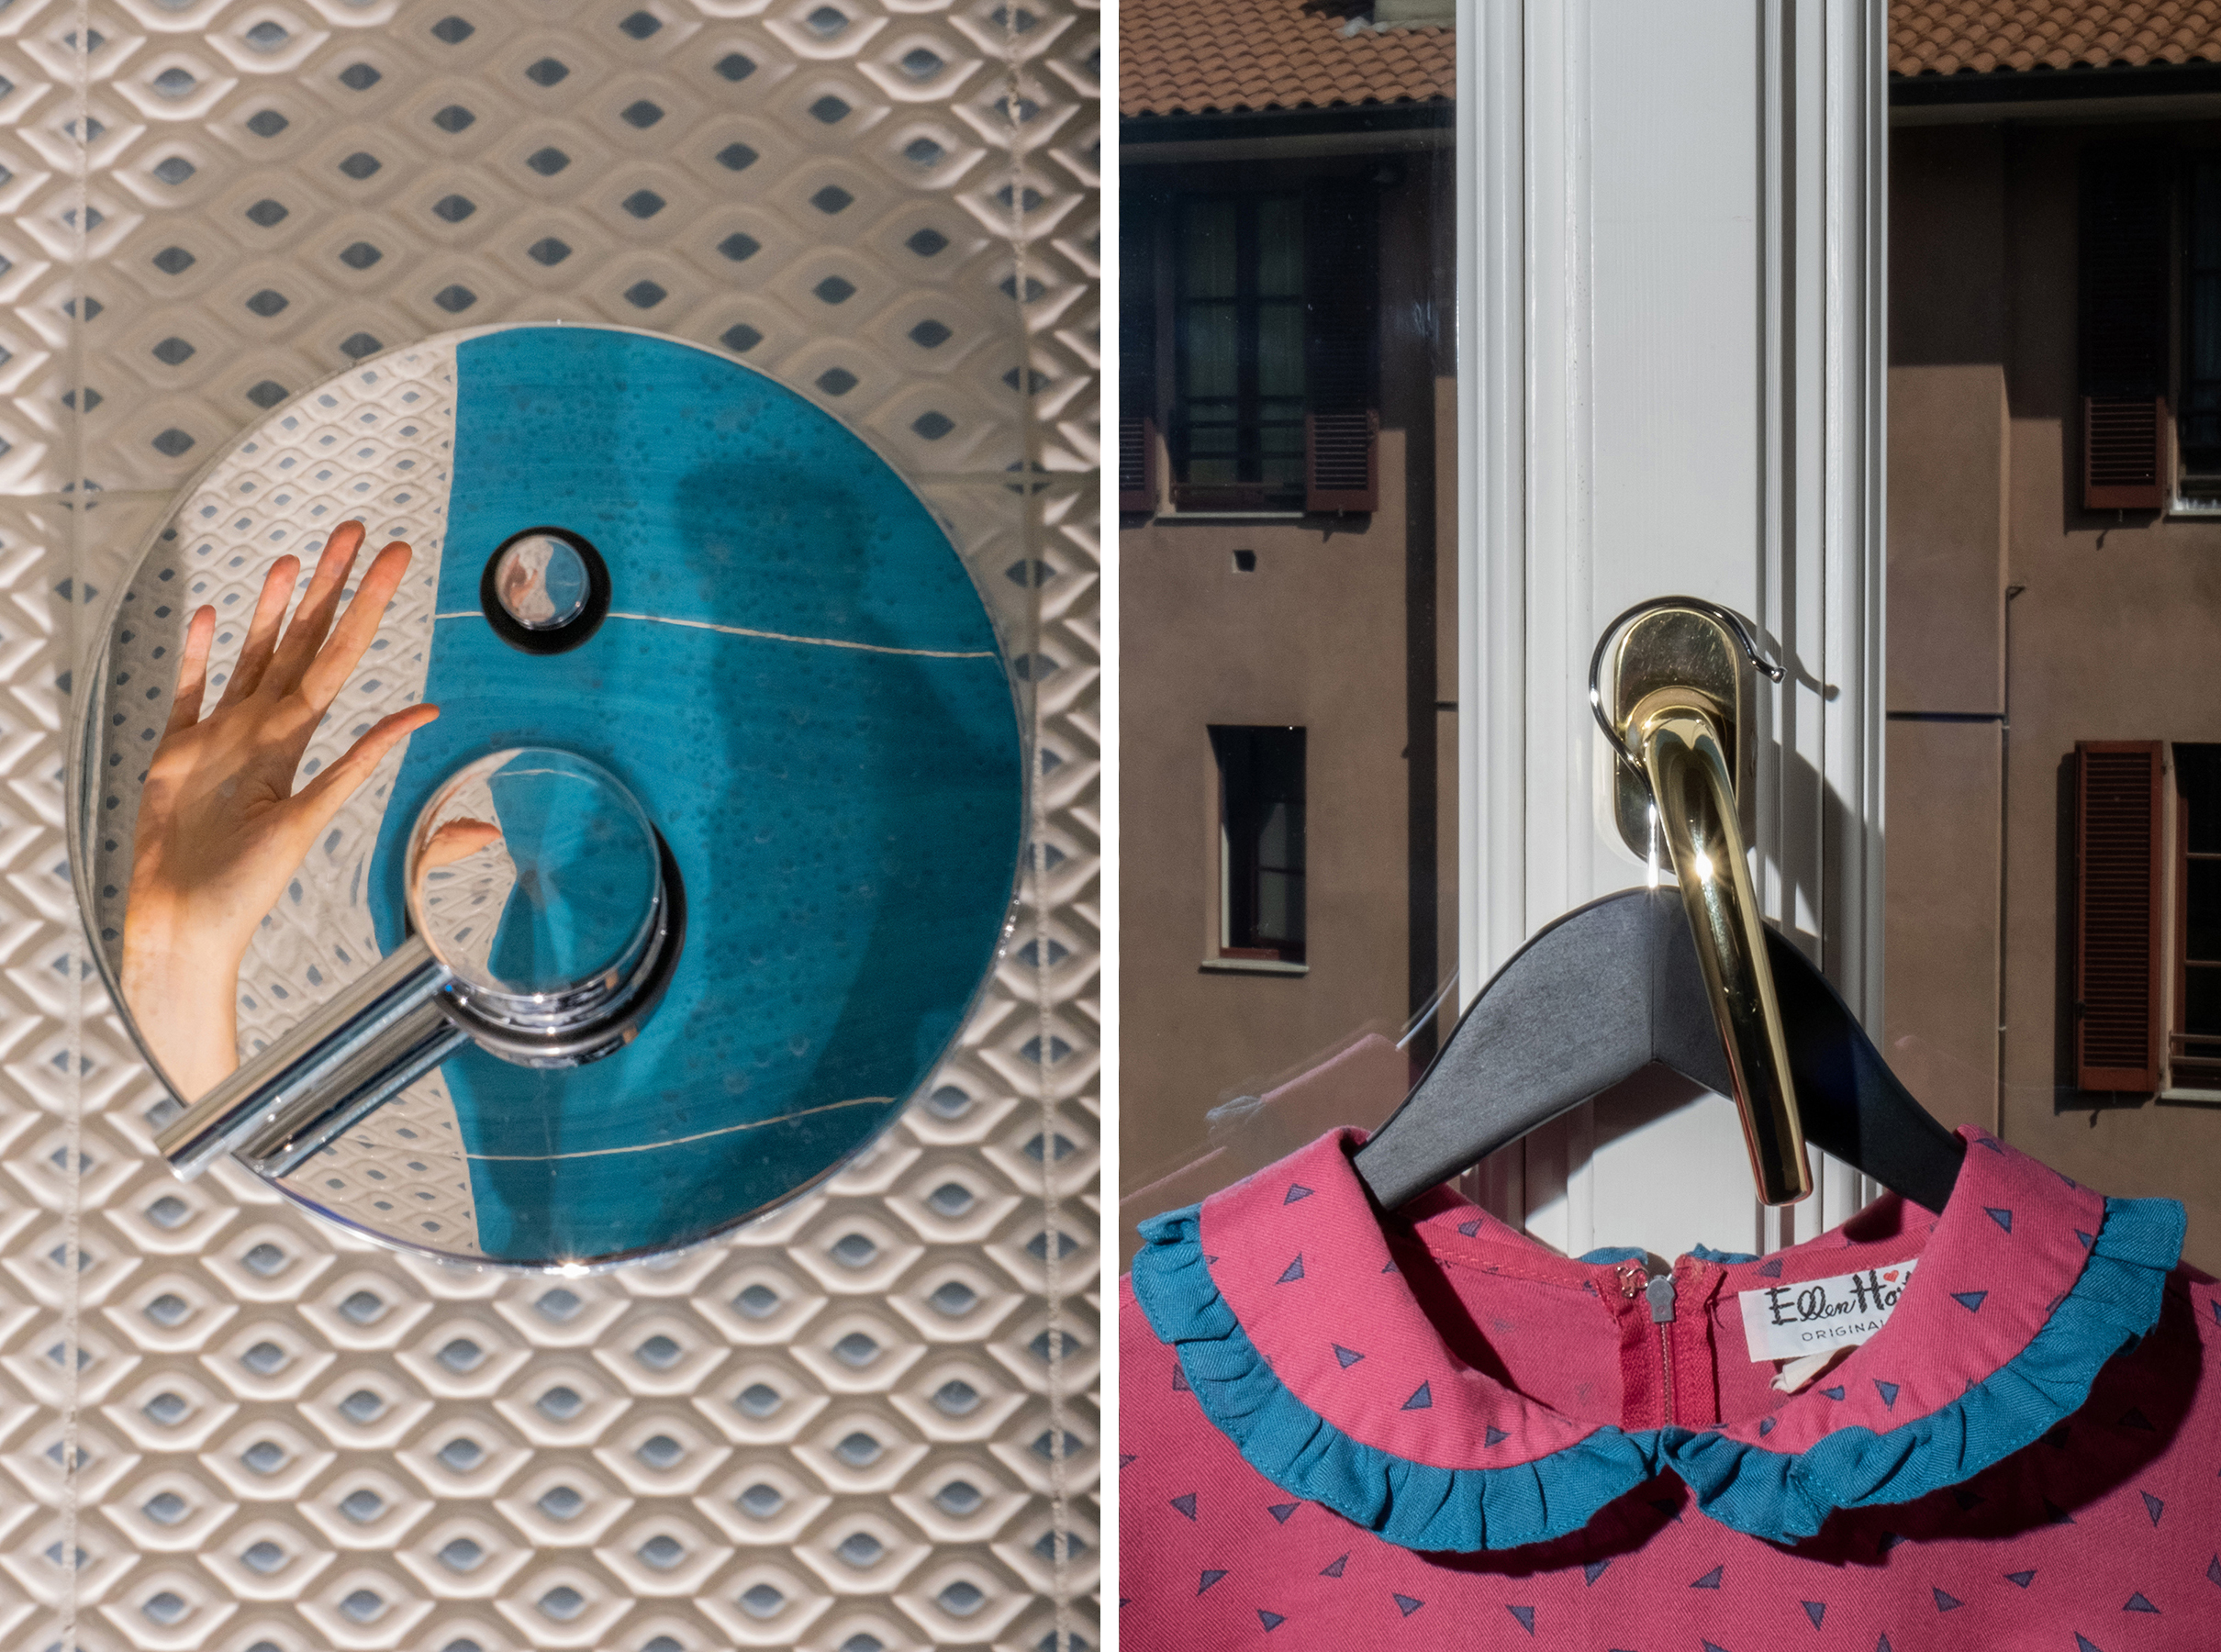 Left: 11:50 A.M. Bathroom details; Right: 12:36 P.M. Detail of a dress on the bedroom window (Lucia Buricelli for TIME)